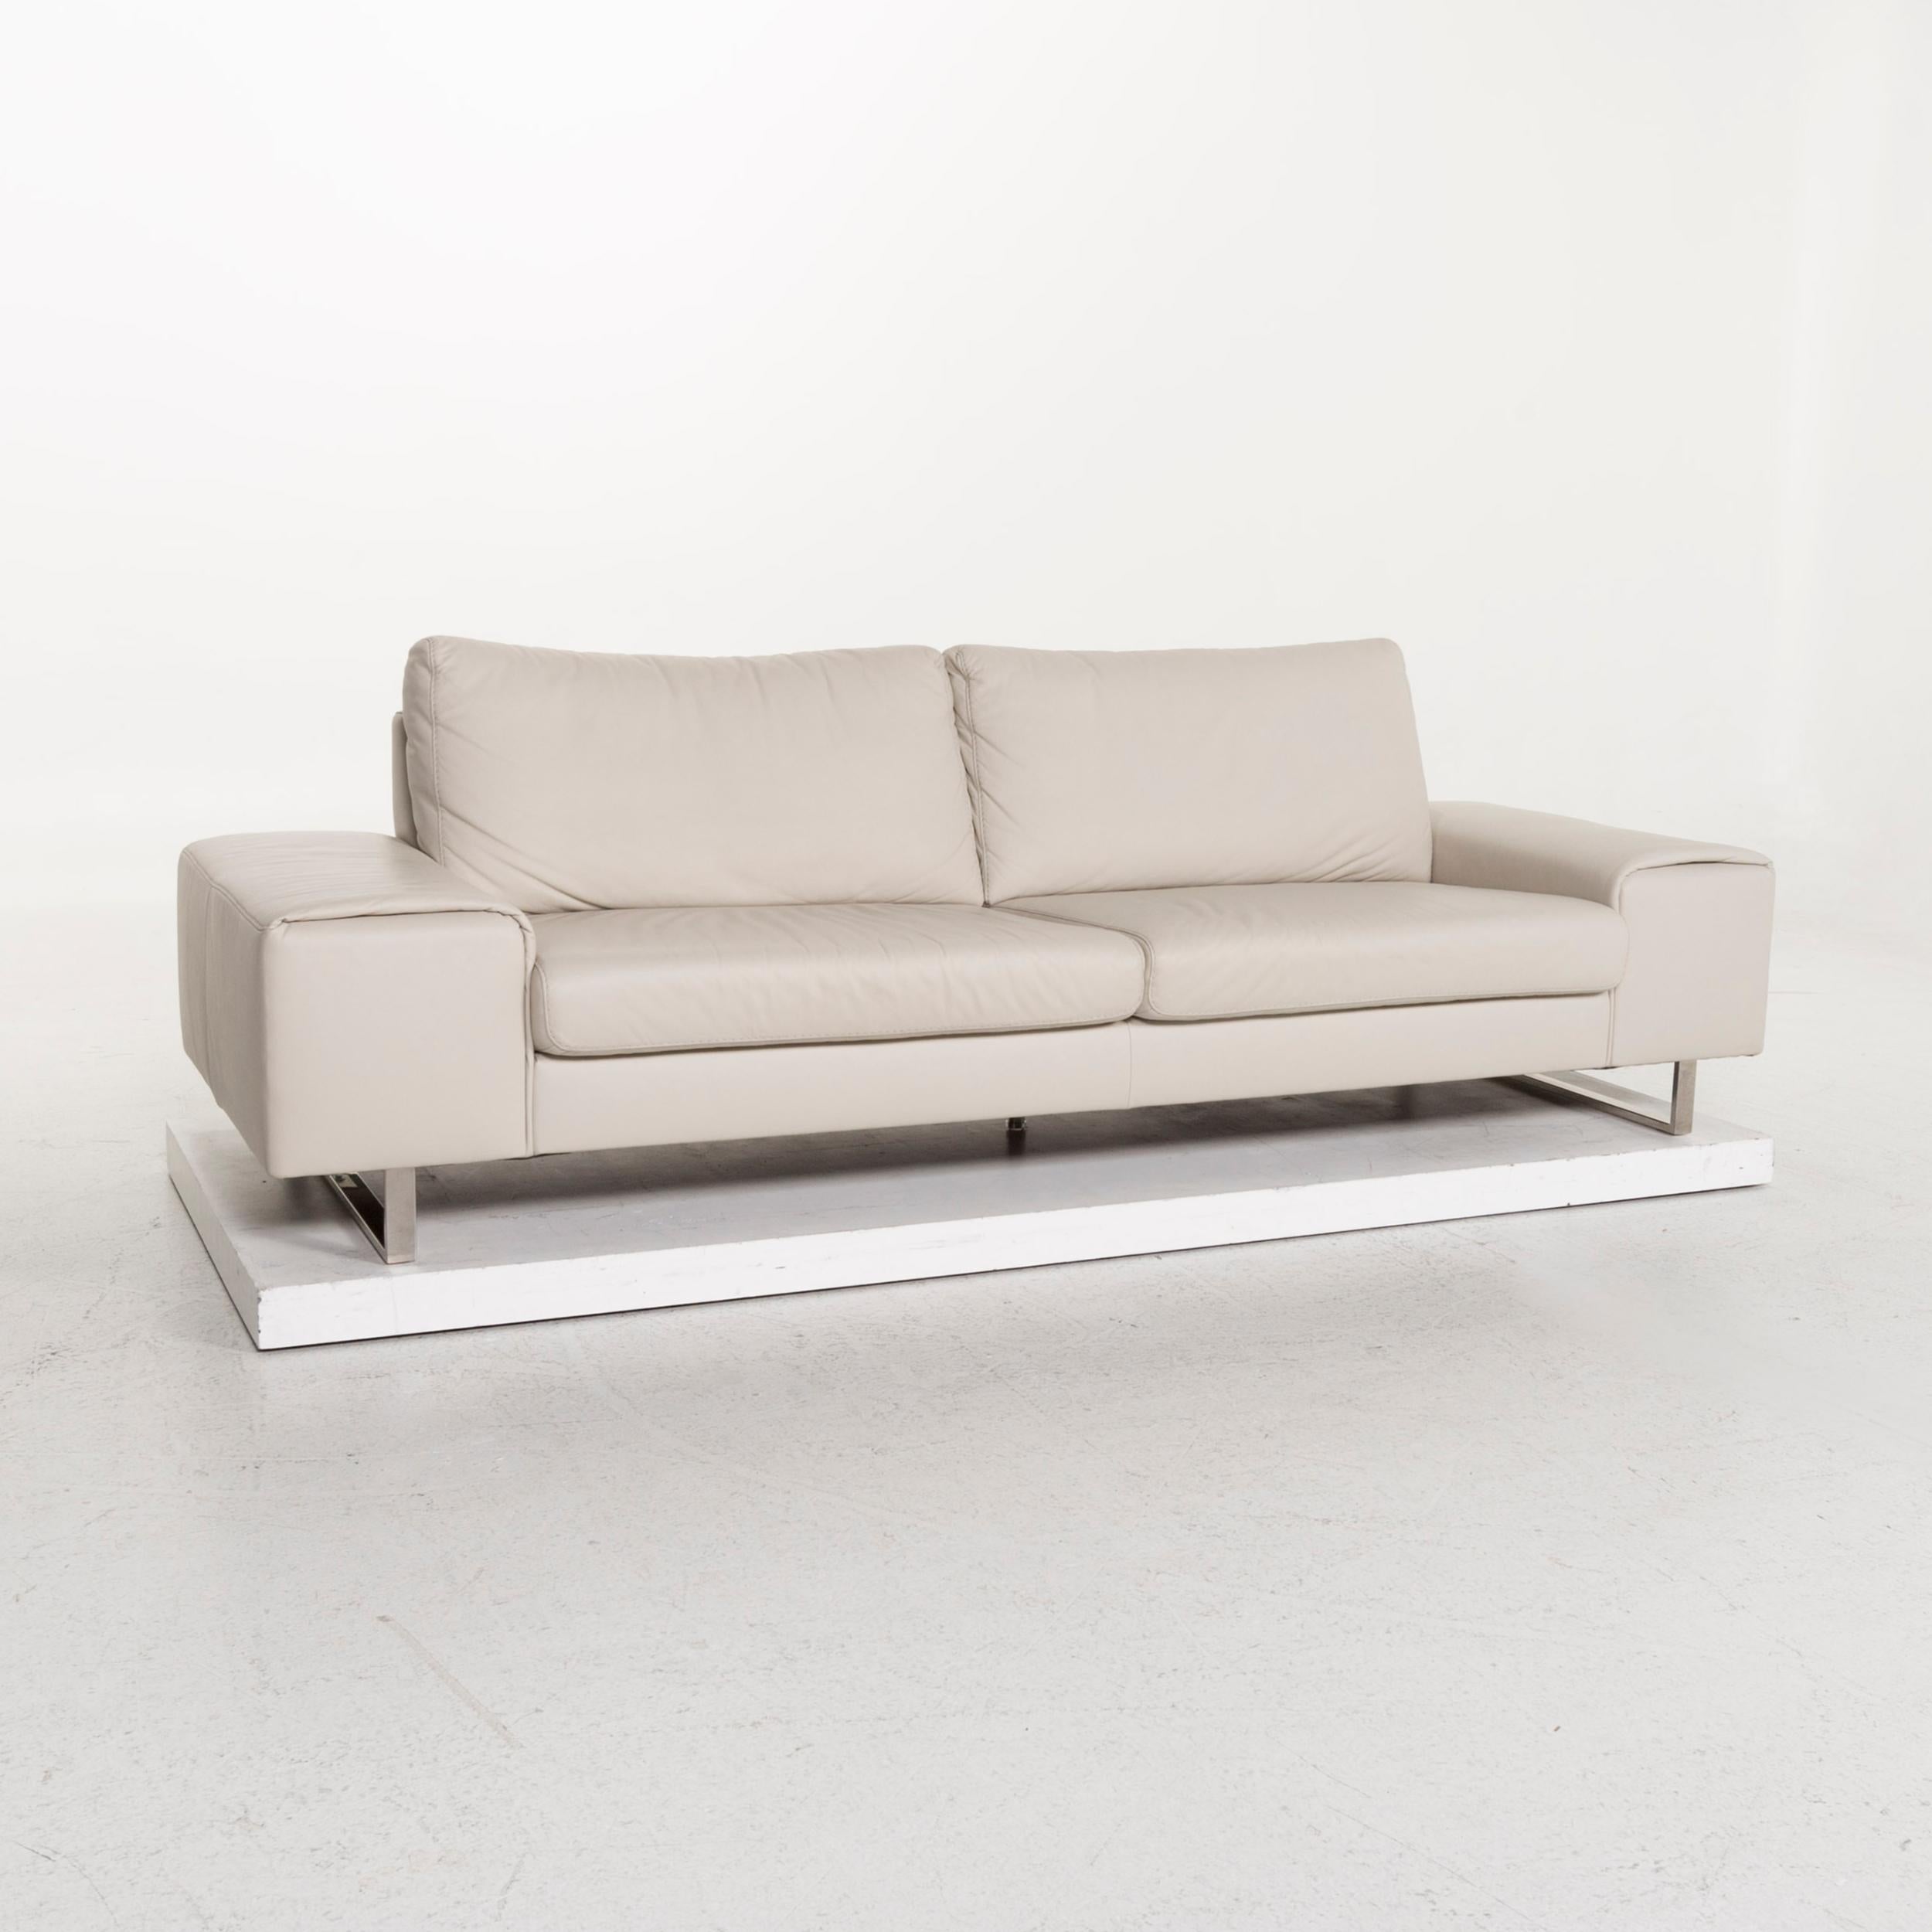 Contemporary Ewald Schillig Leather Sofa Gray Three-Seat For Sale